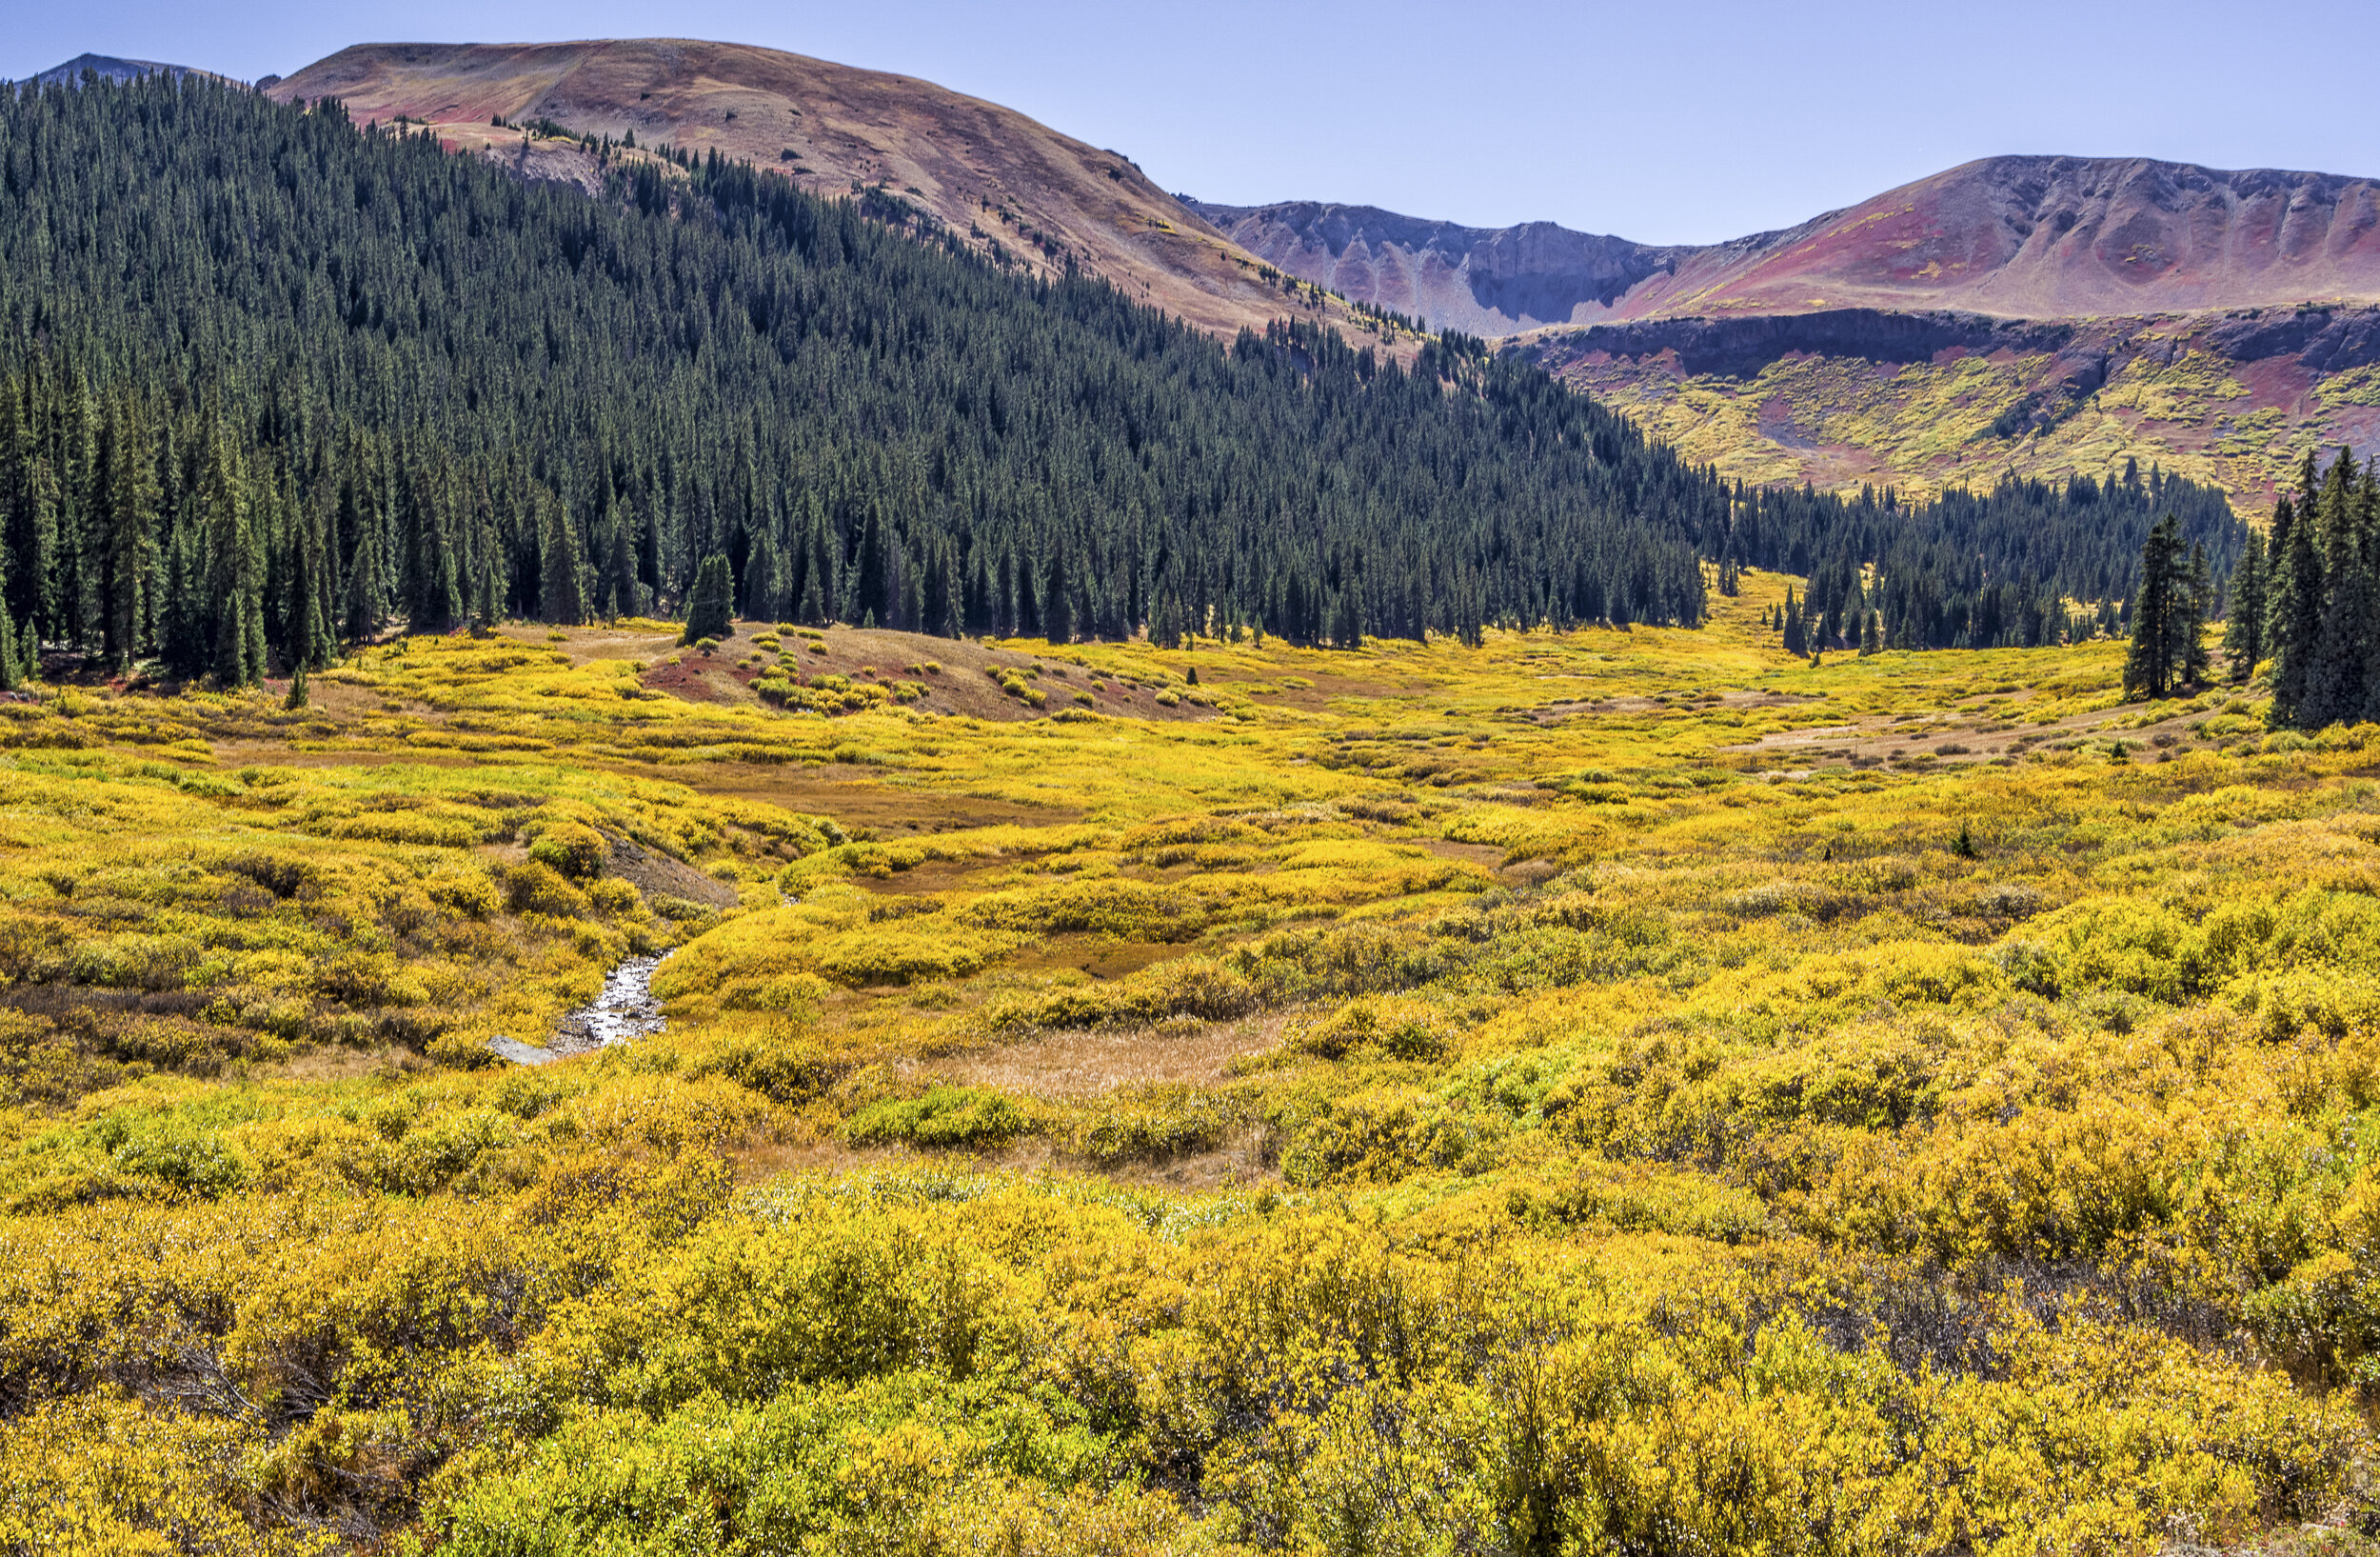 Frank Barnitz, Fall comes to Independence Pass